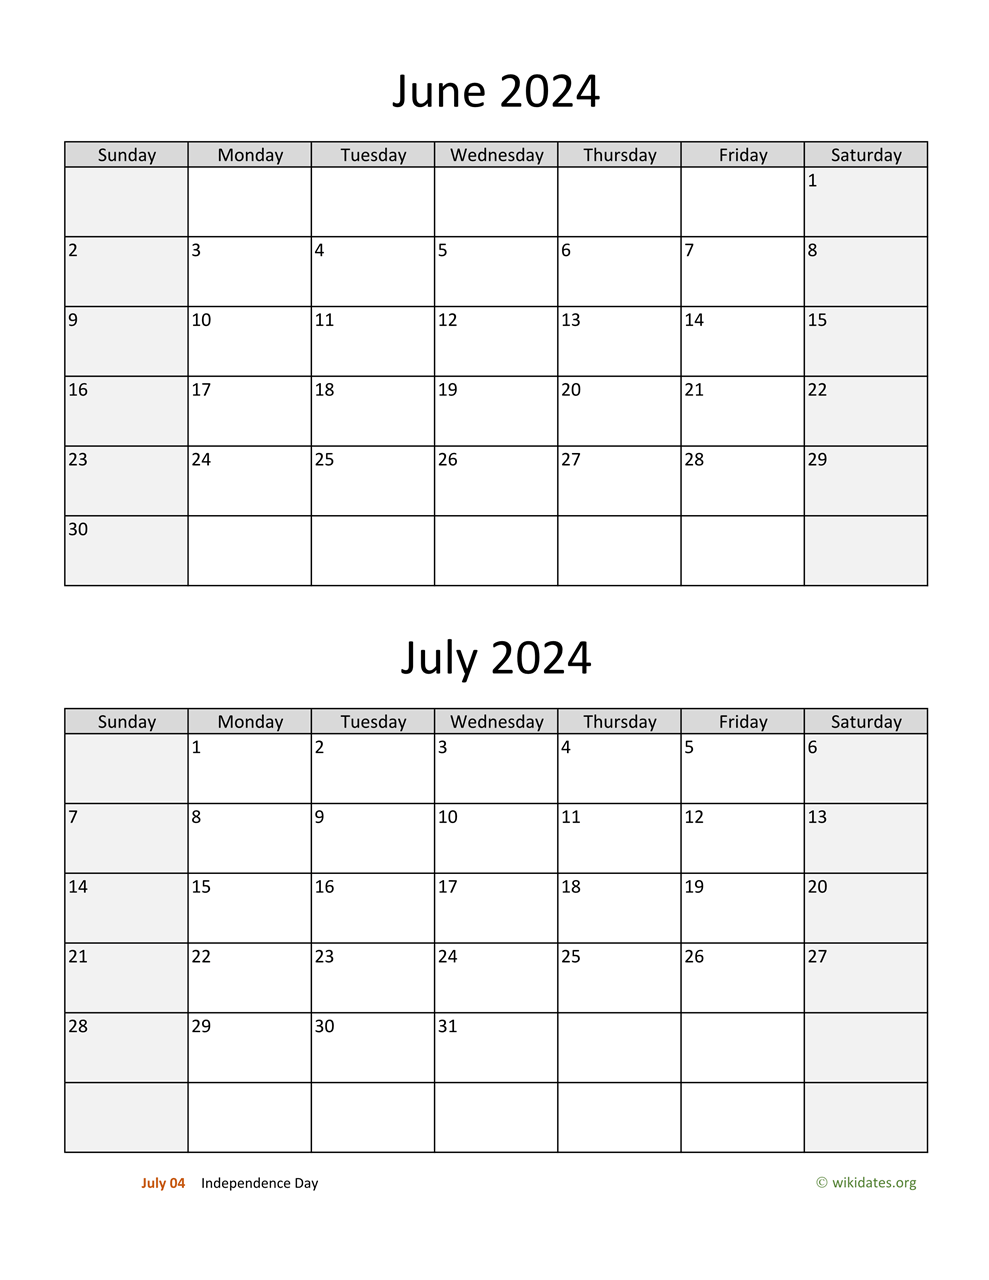 June And July 2024 Calendar | Wikidates for Printable Monthly Calendar June July August 2024